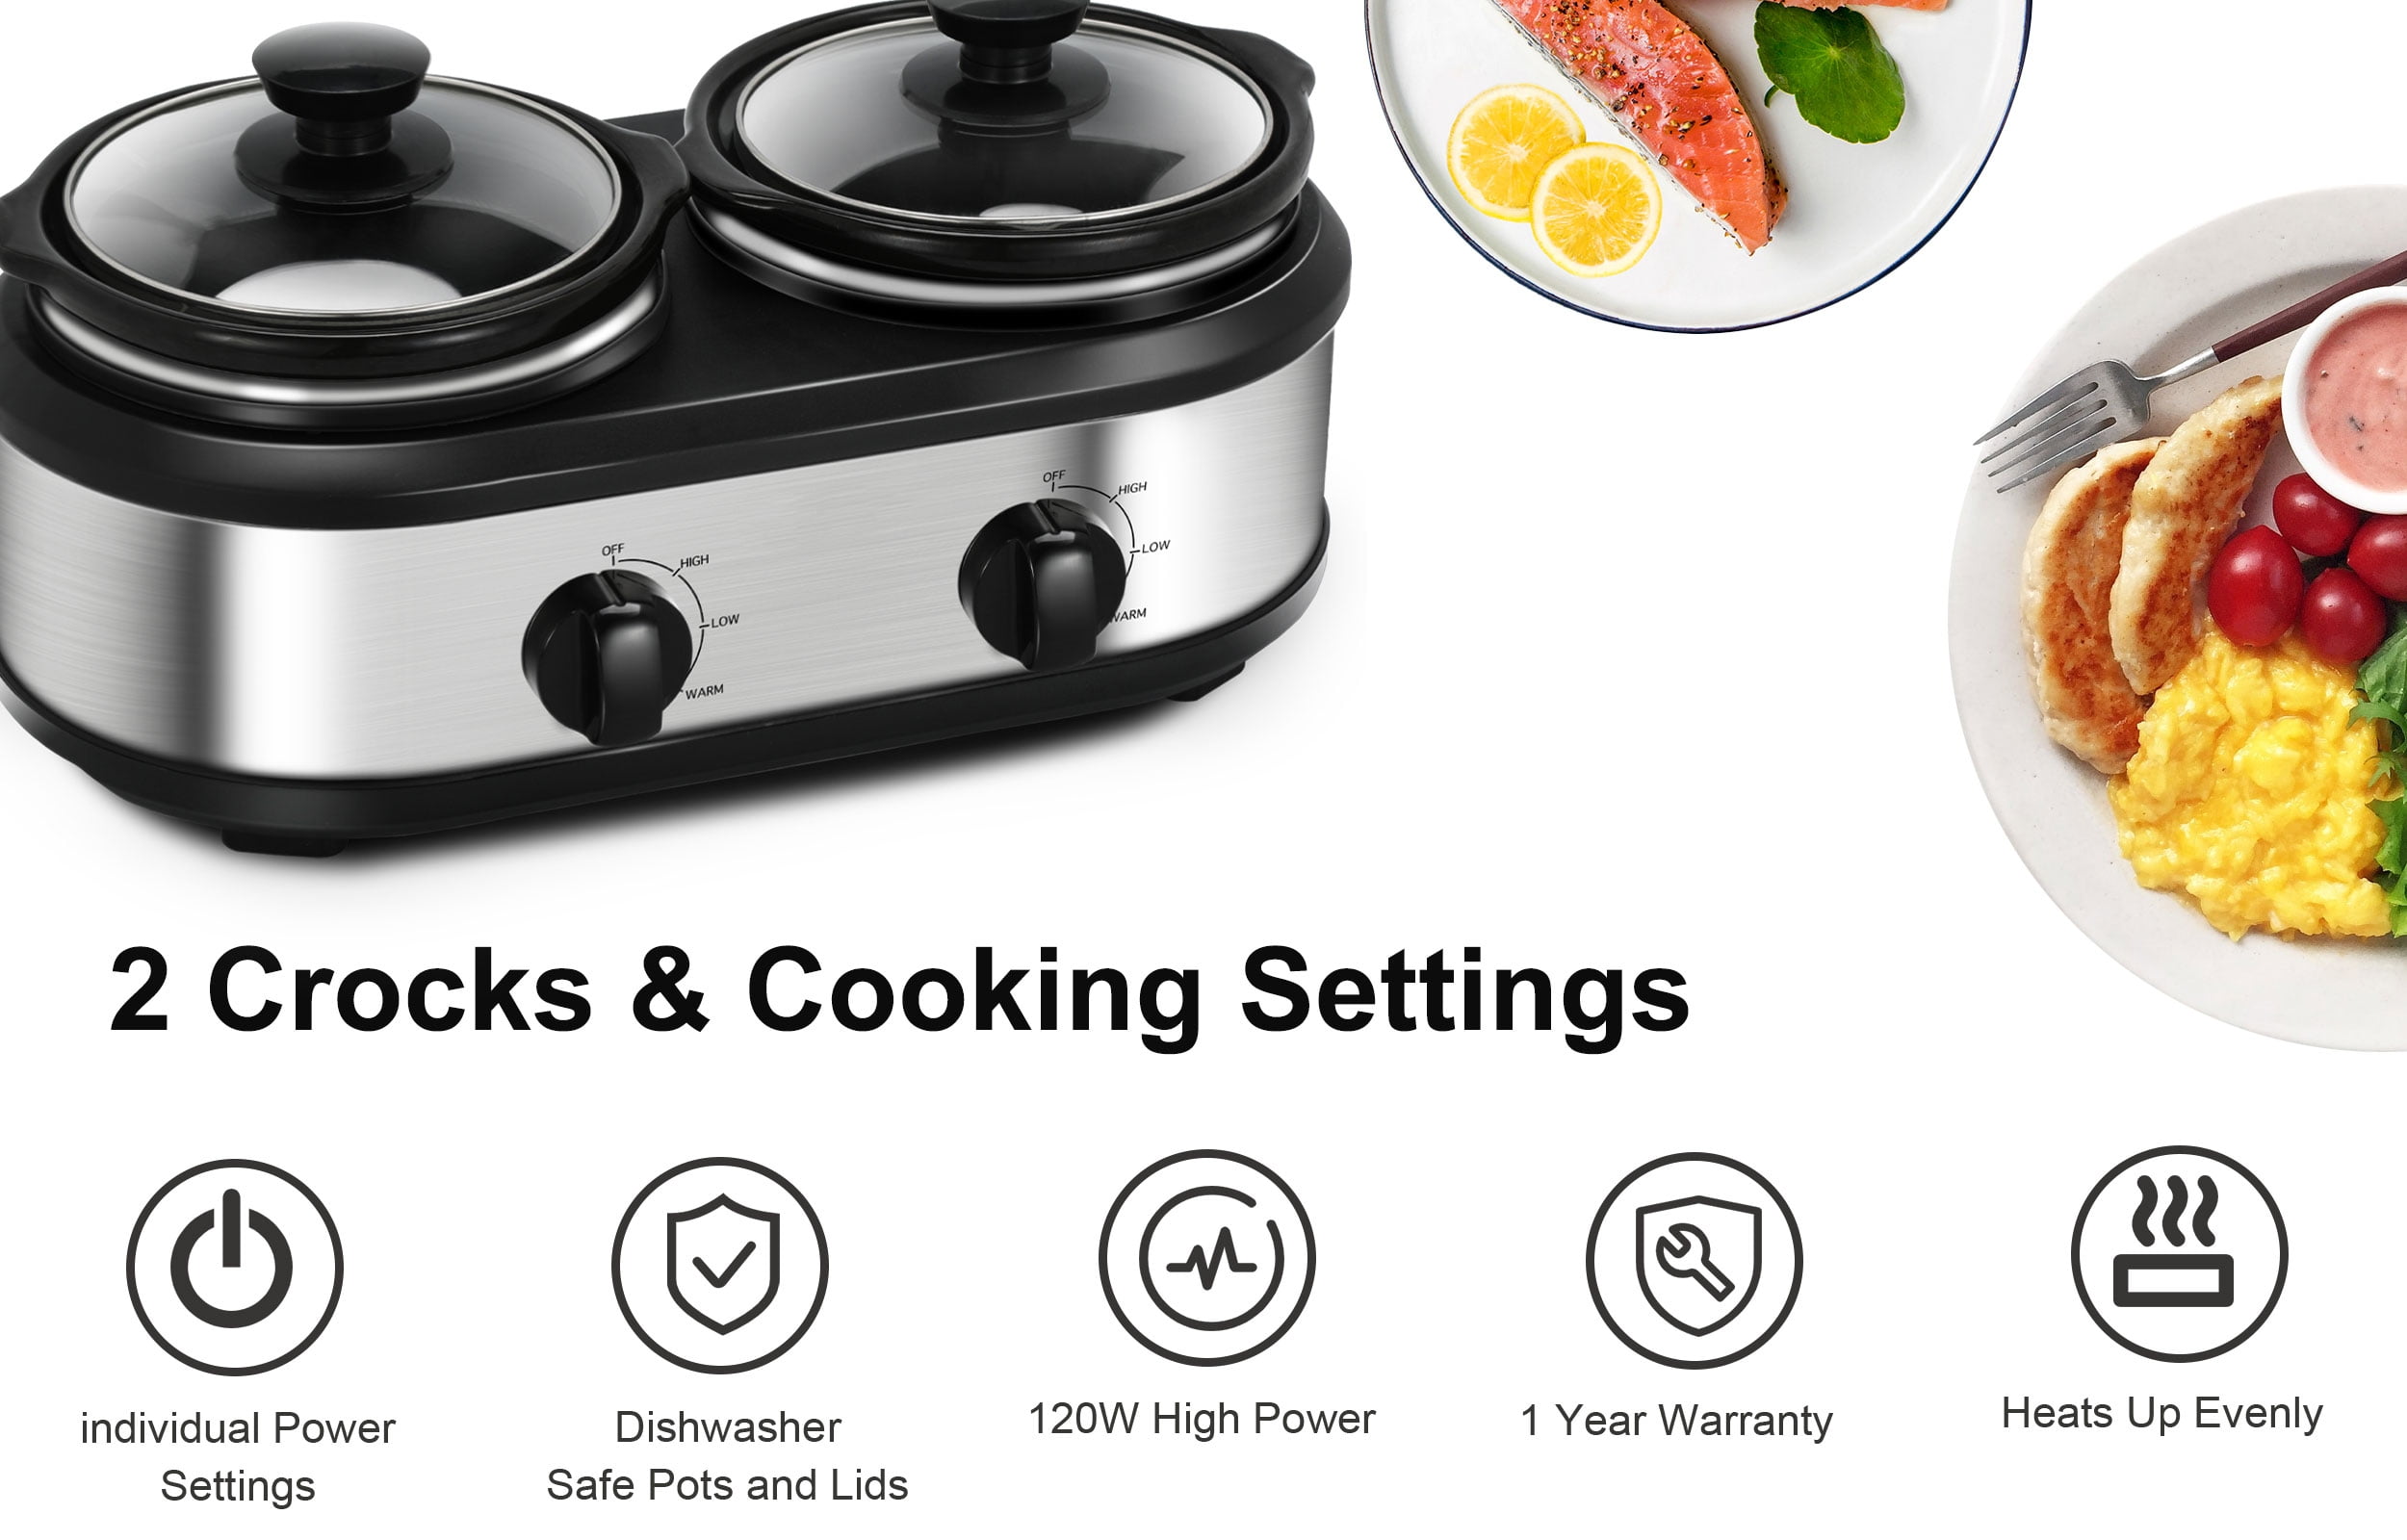 Chefman RJ15-125-D Double Slow Cooker & Buffet Server with 2 Removable 1.25  Qt. Oval Crocks, Pot Inserts Individually Heat Controlled, 2.5 Quarts,  Stainless Ste…